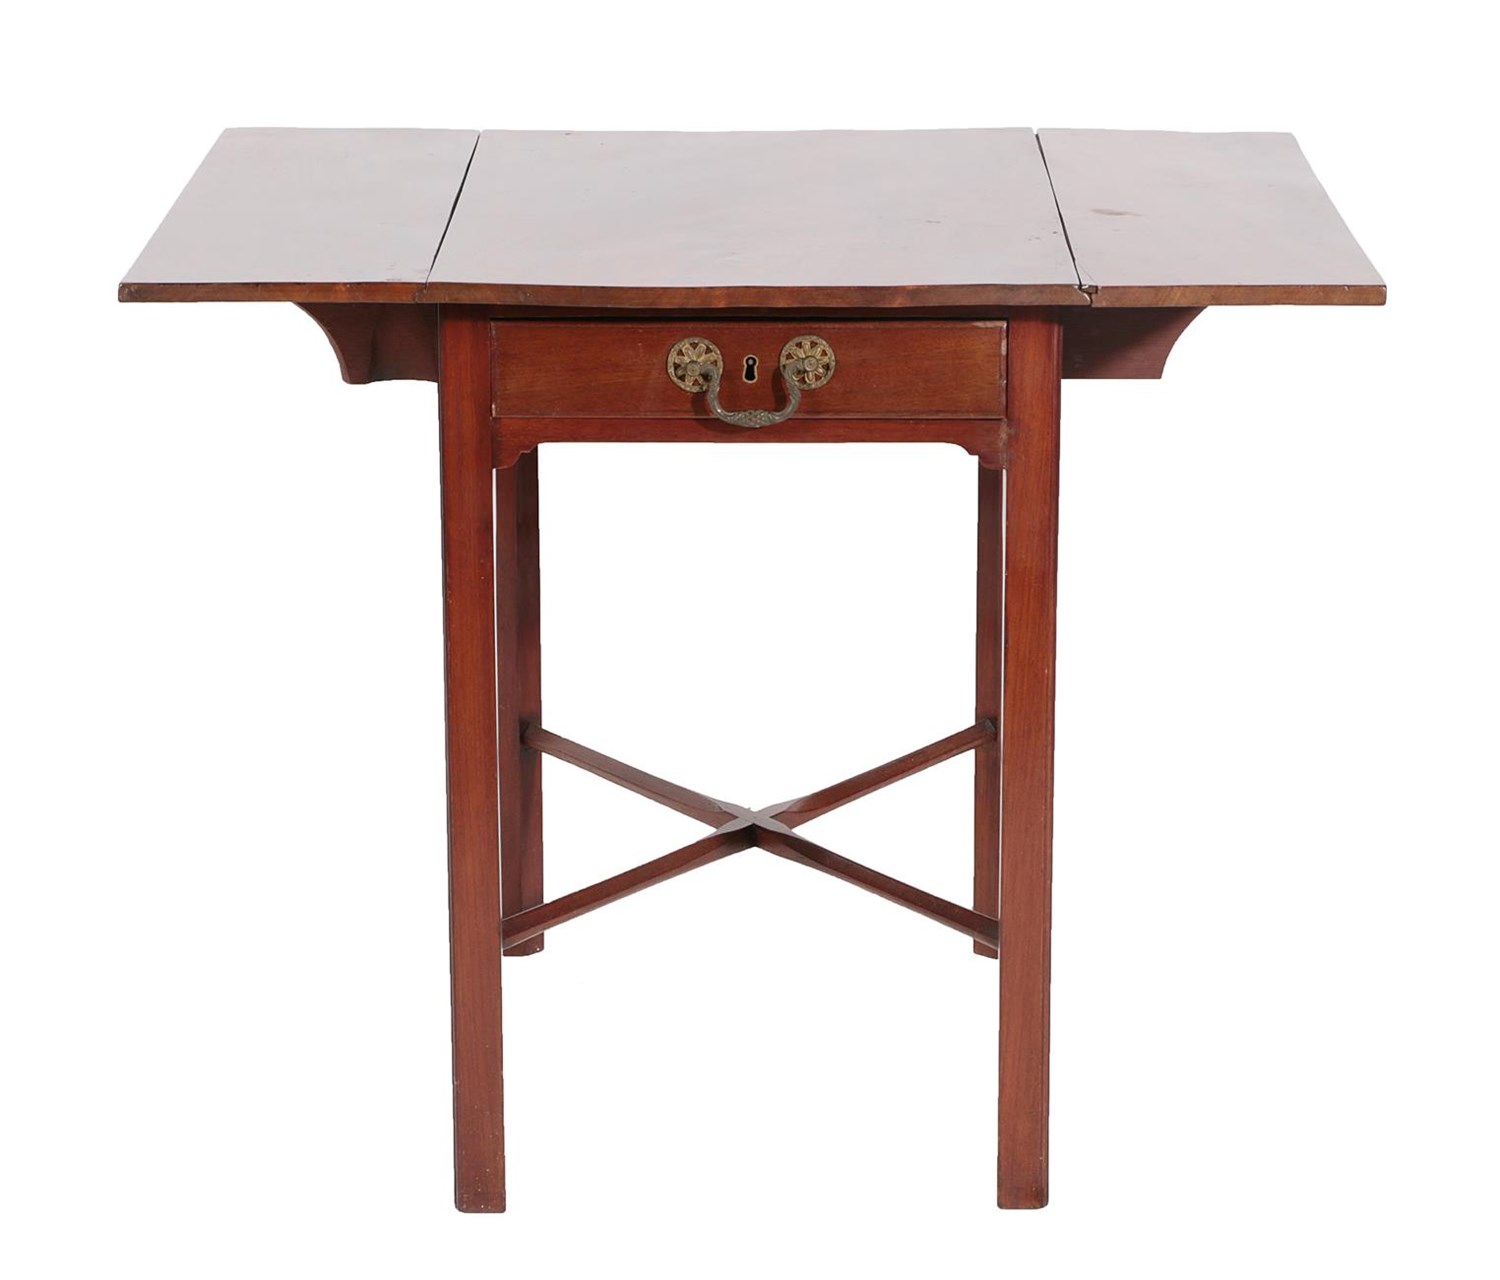 Lot 563 - ~ A George III Mahogany Pembroke Table, late 18th century, with two drop leaves above a real...